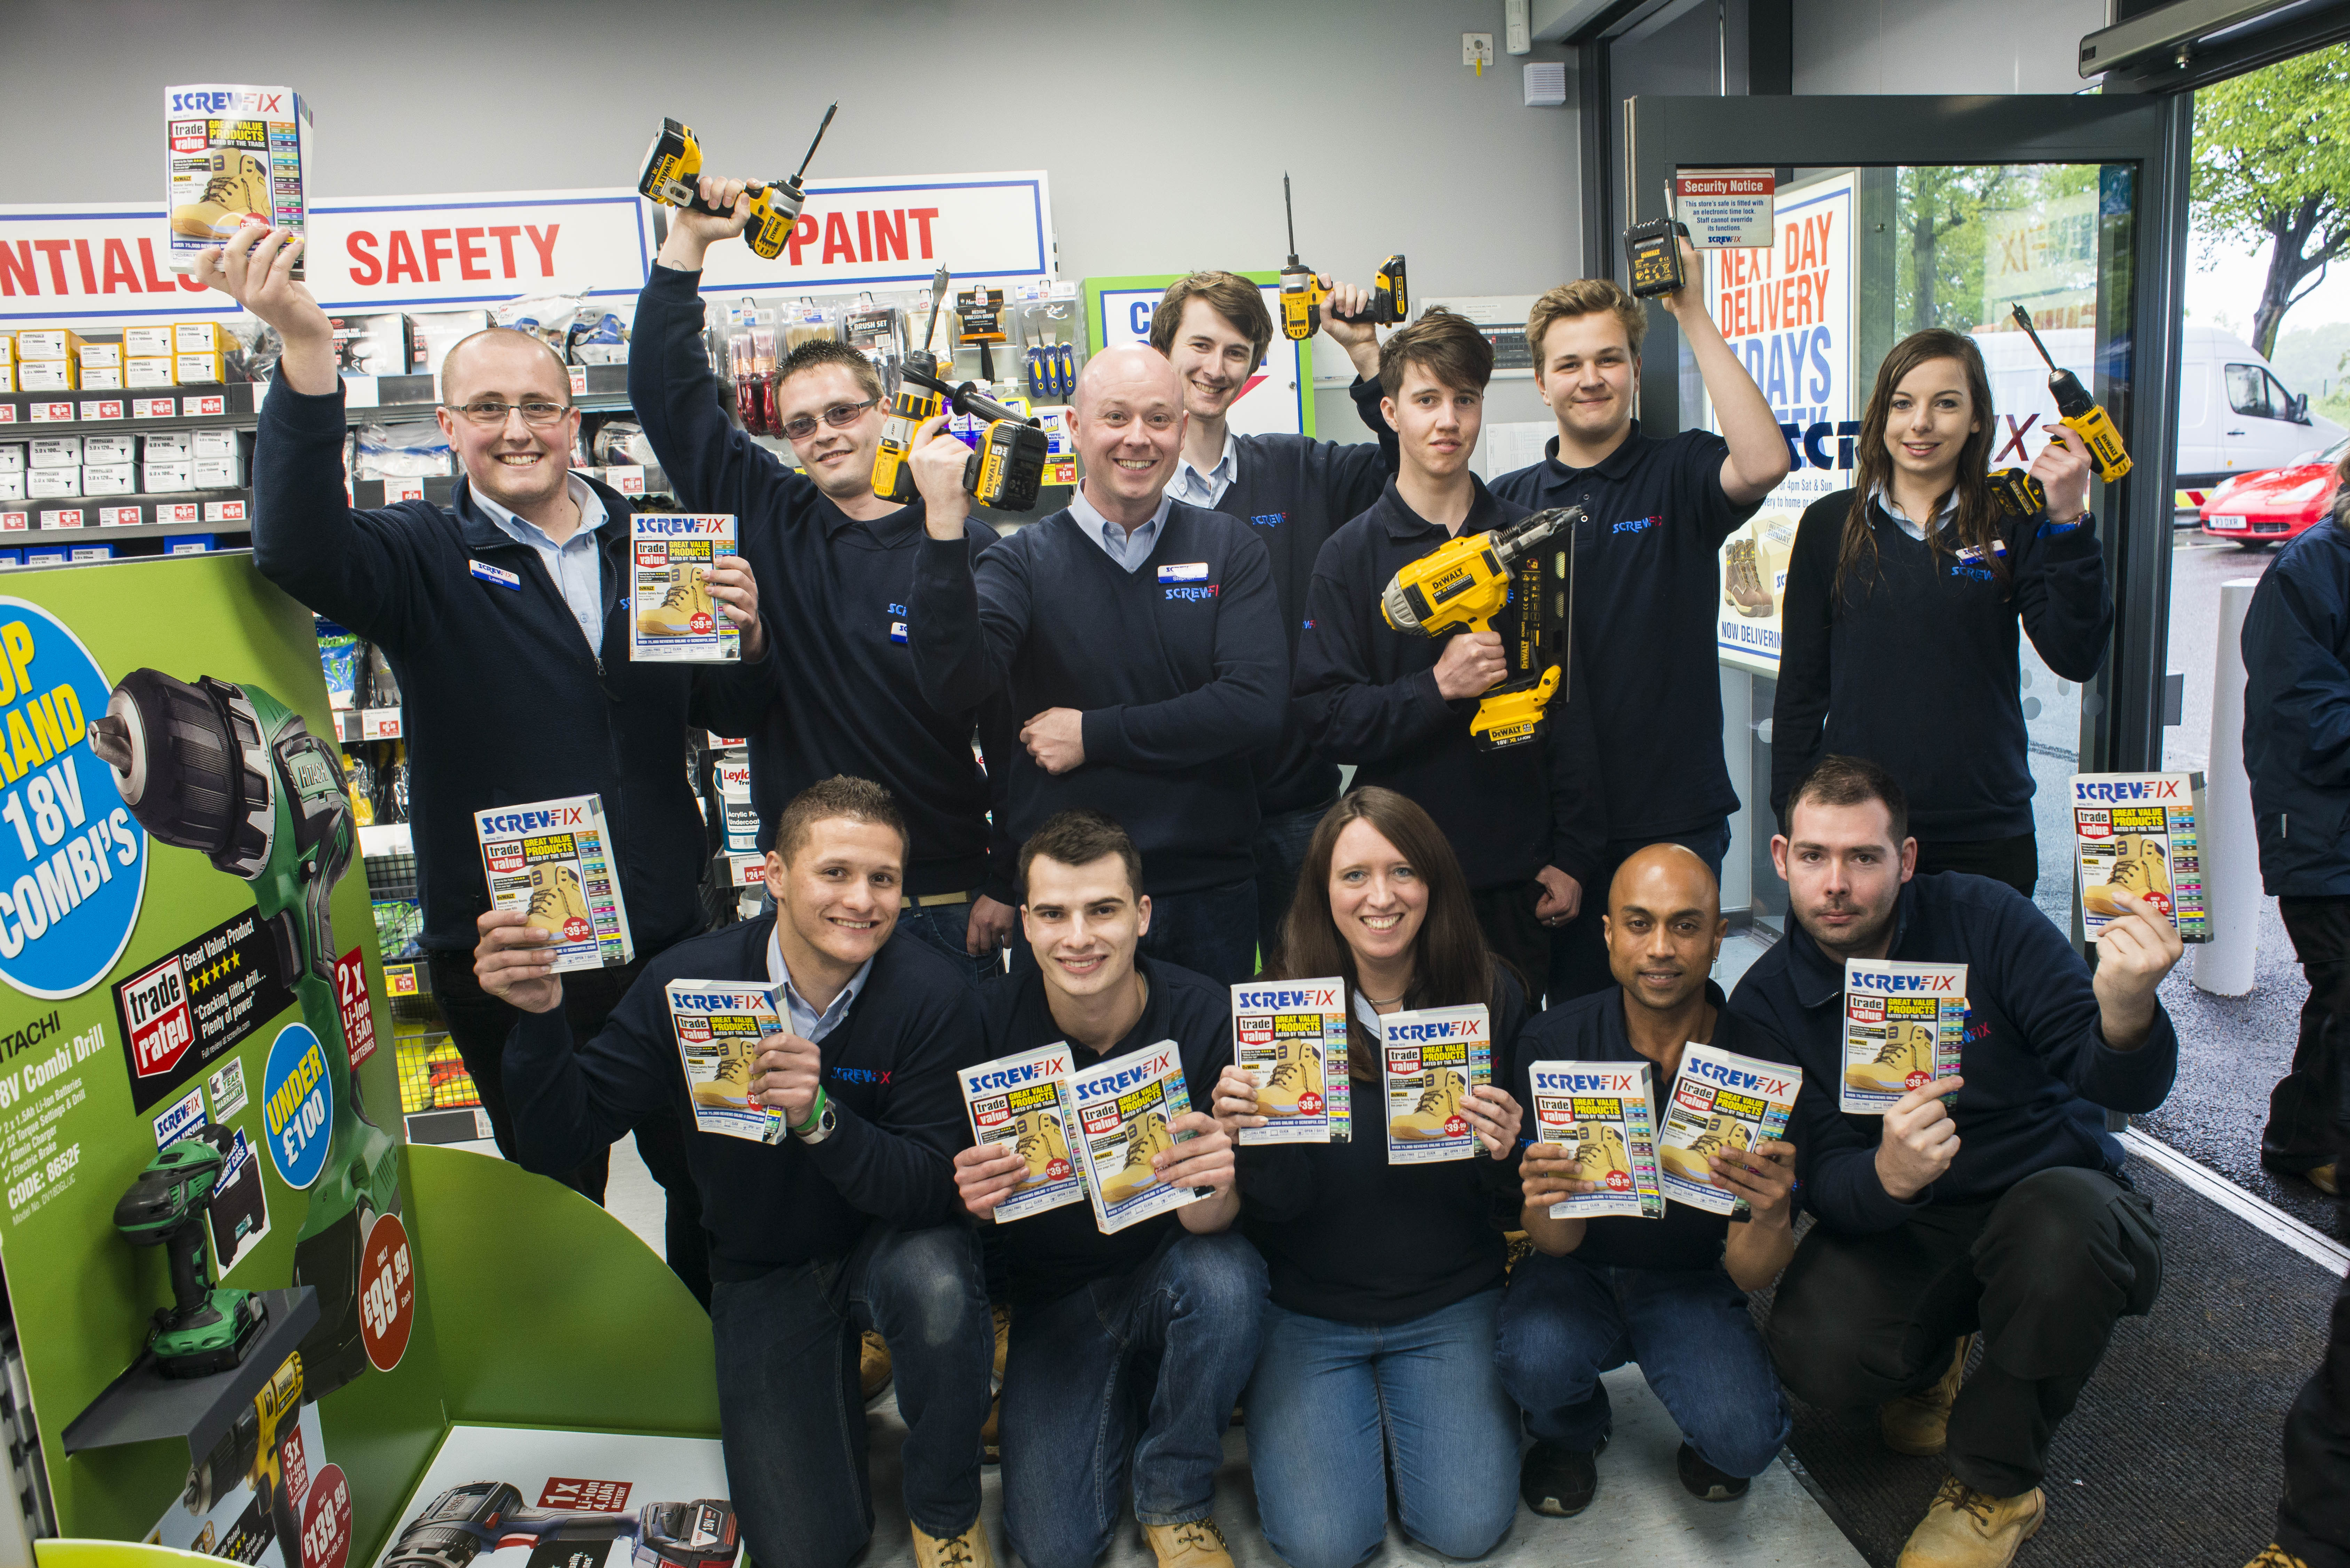 St Albans’ first Screwfix store to open on 14 May